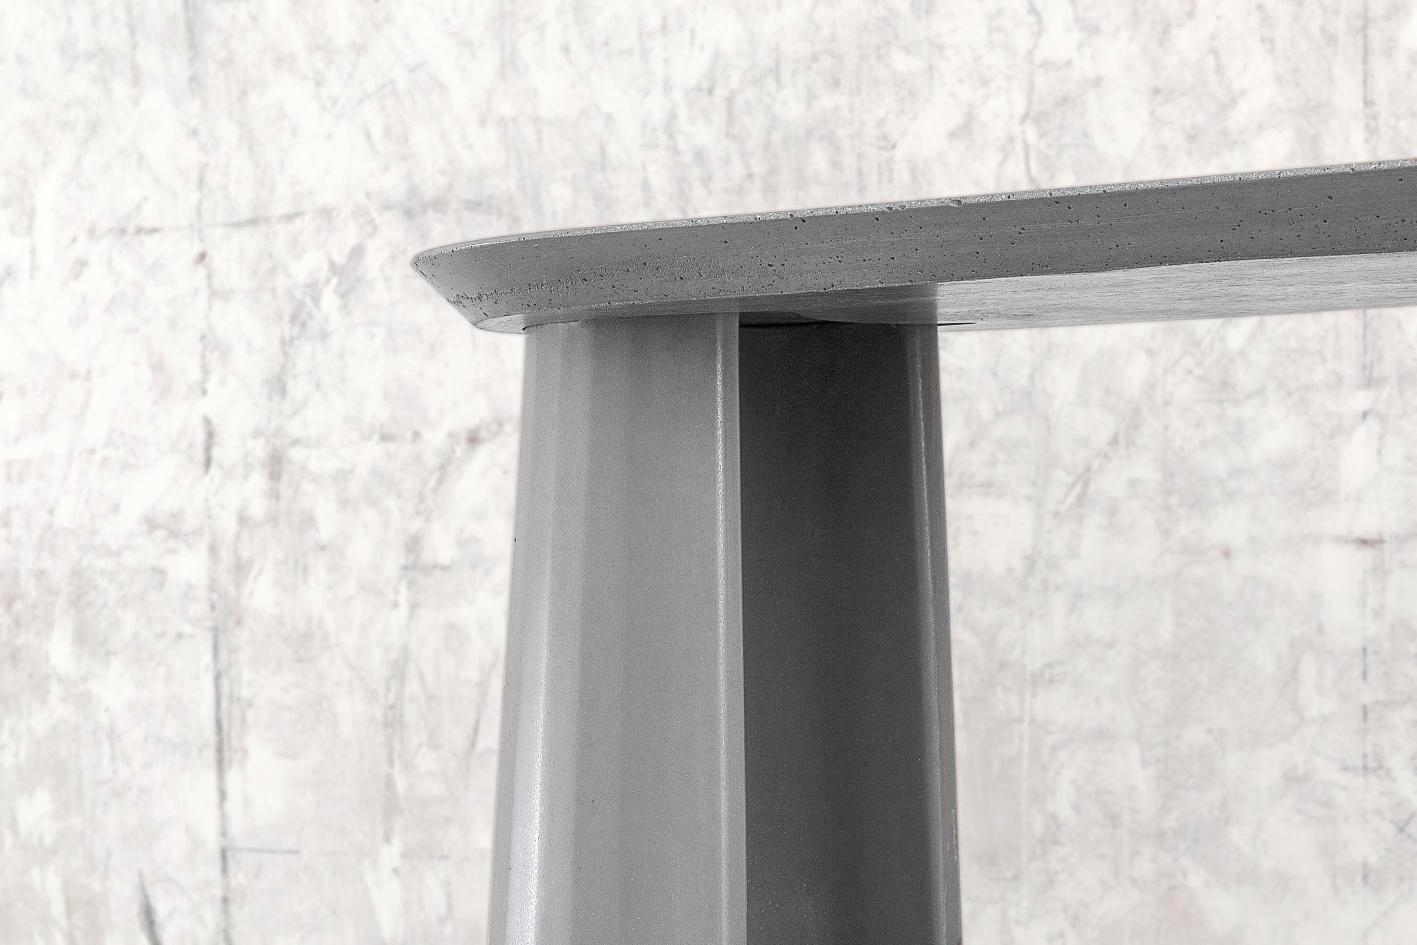 Console table part of a collection of modular system in ultra high performing cement mortar. UHPC shelves and abutment colored in the mixture and sandblasted. Available in eight different colors: Brick, silver, powder, cream, fir, dark, chocolate,